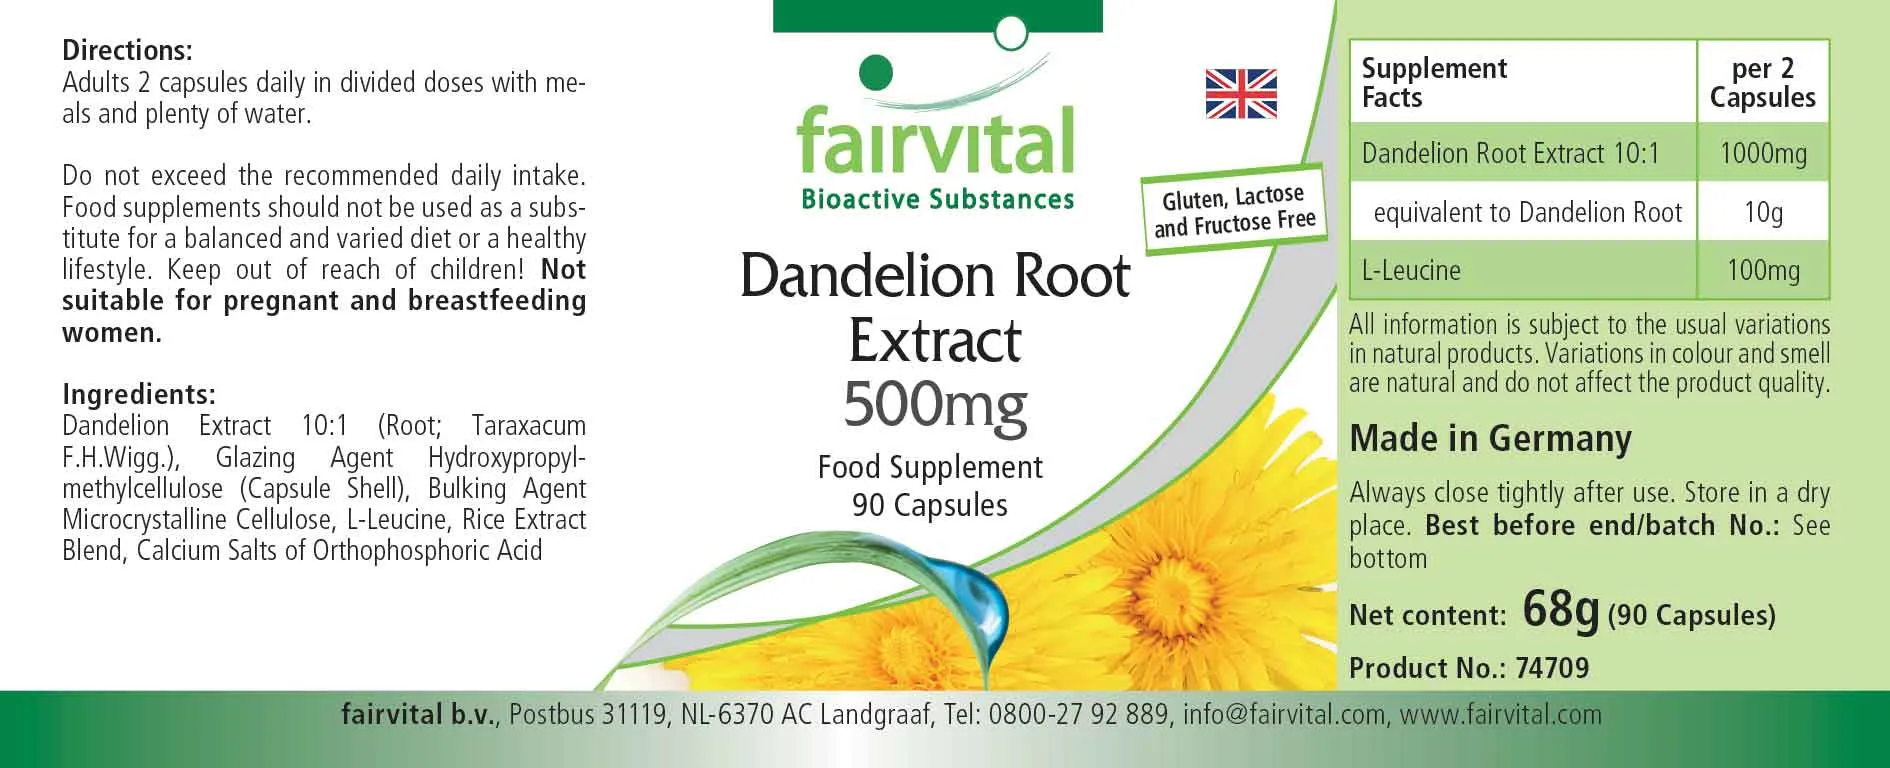 Dandelion root extract 500mg - 90 capsules